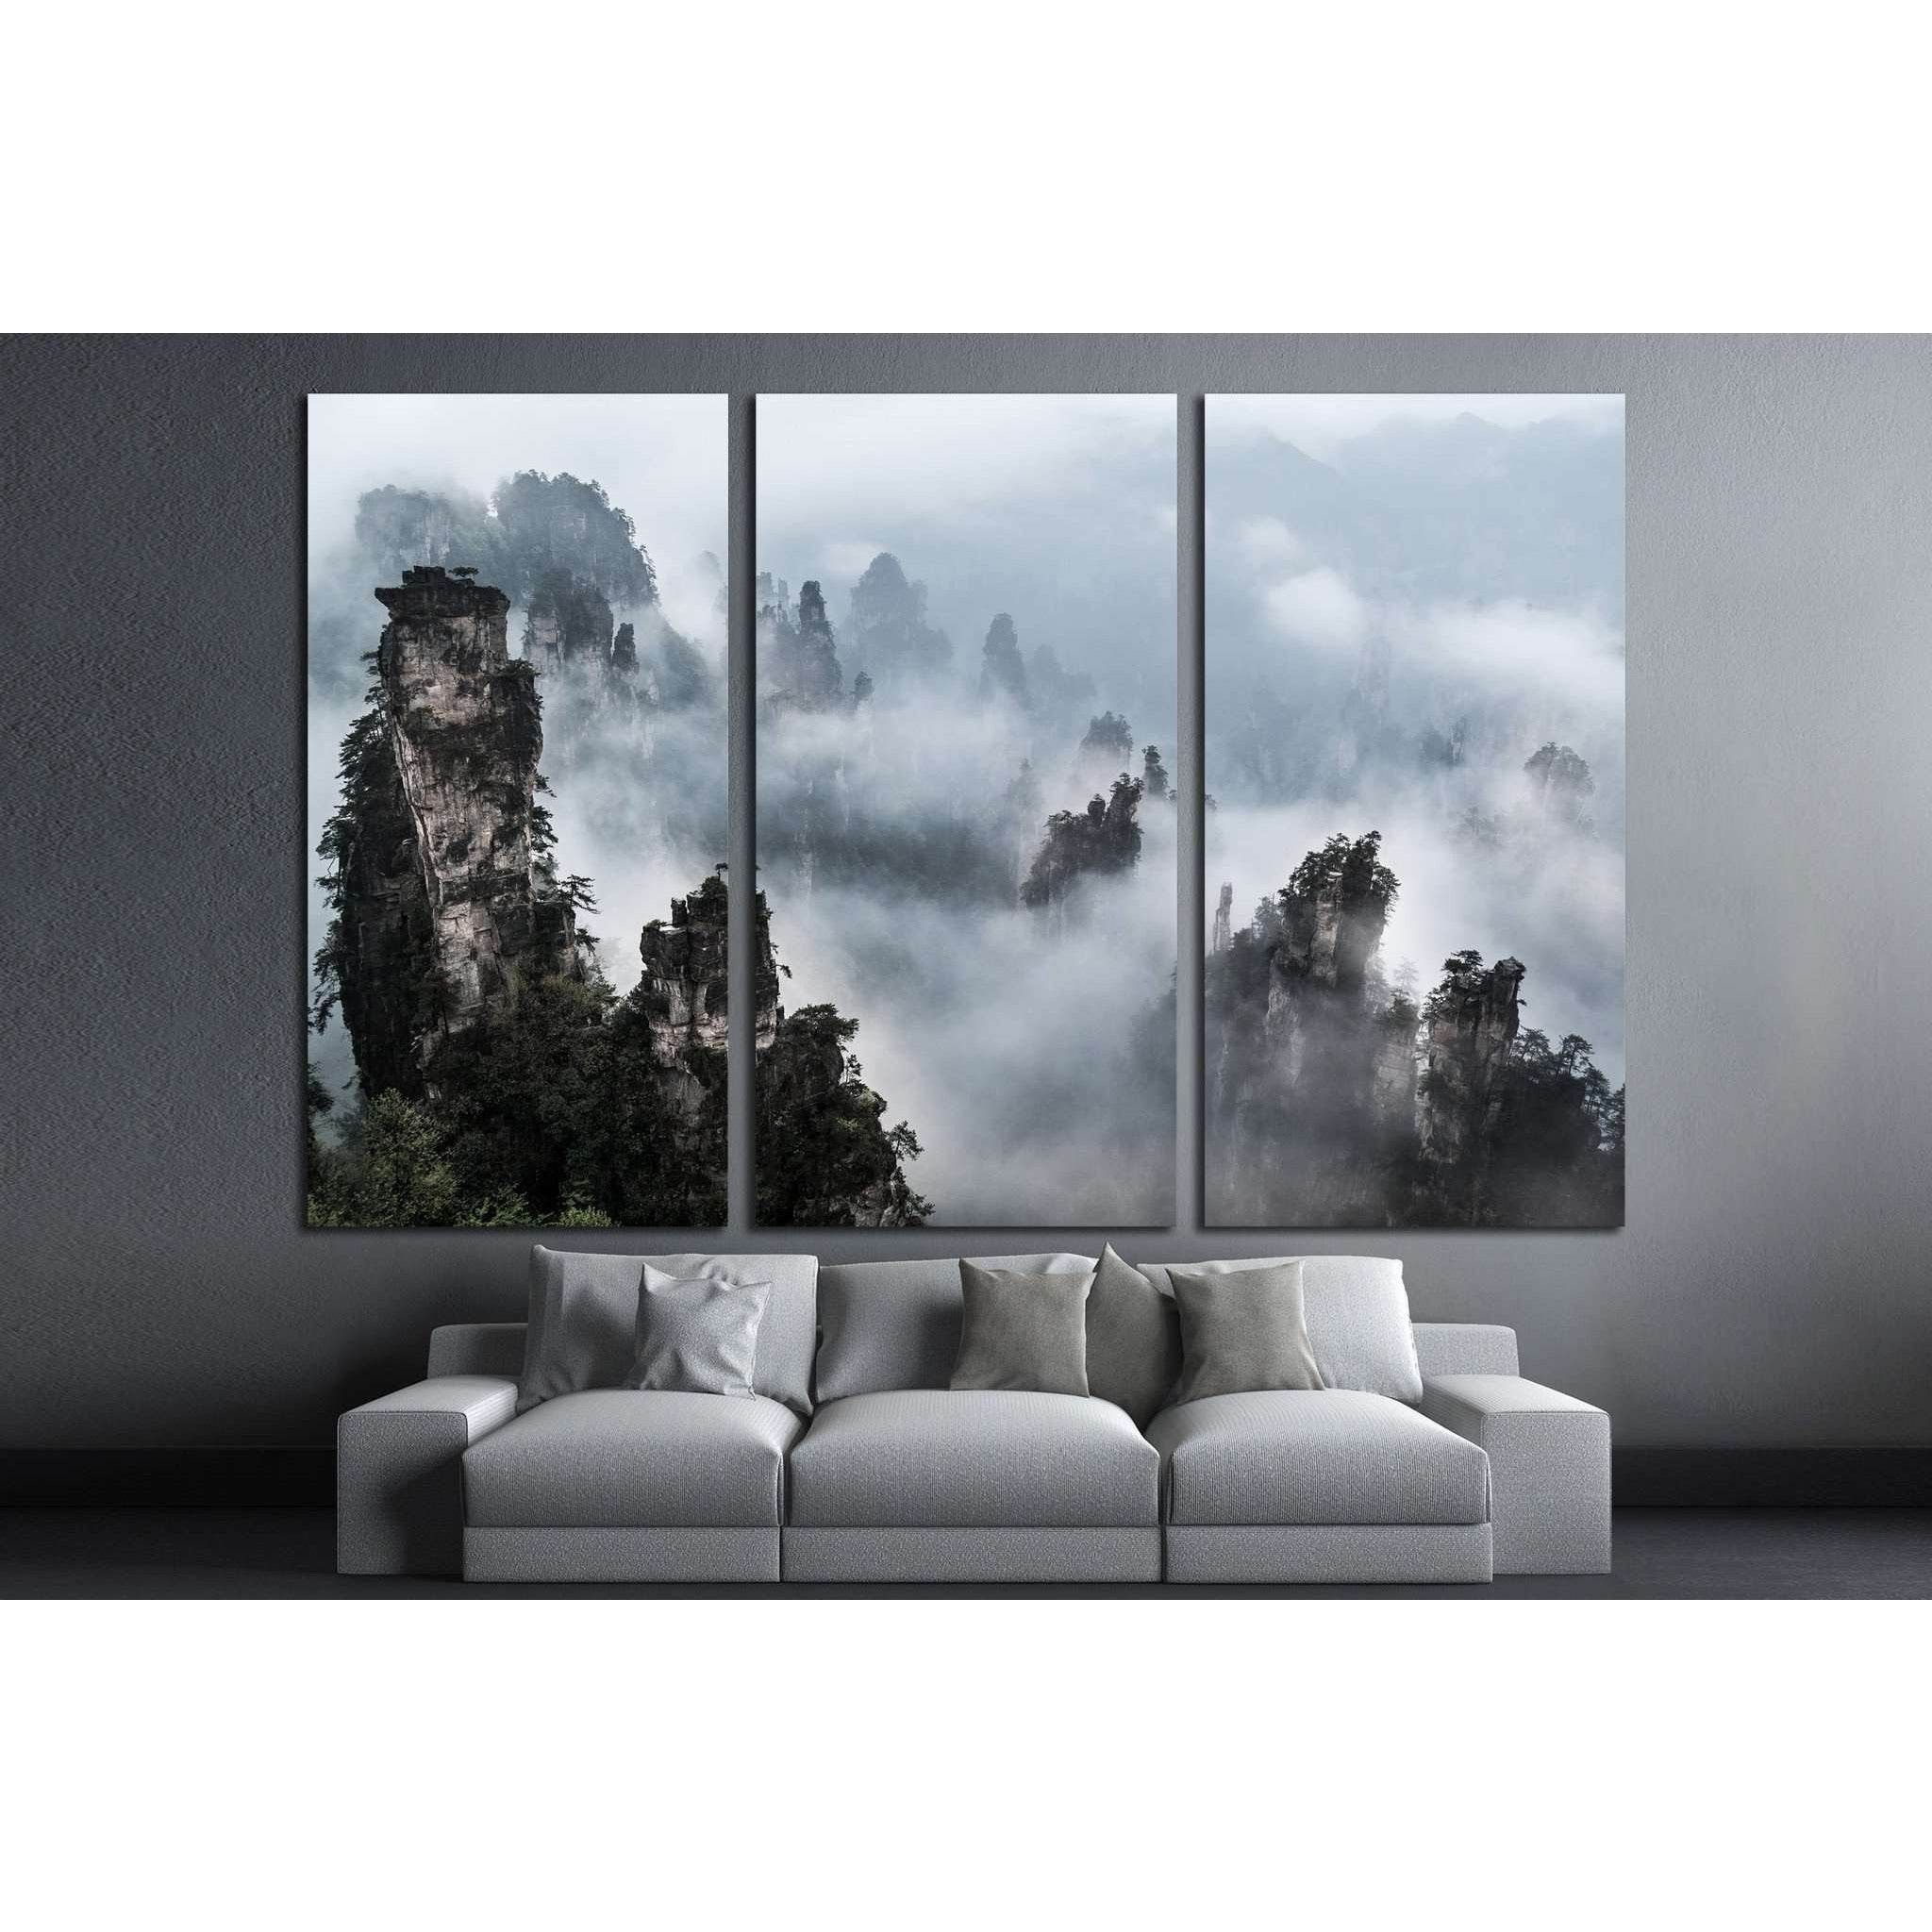 Wulingyuan national forest park in Hunan province, China №1993 Ready to Hang Canvas Print